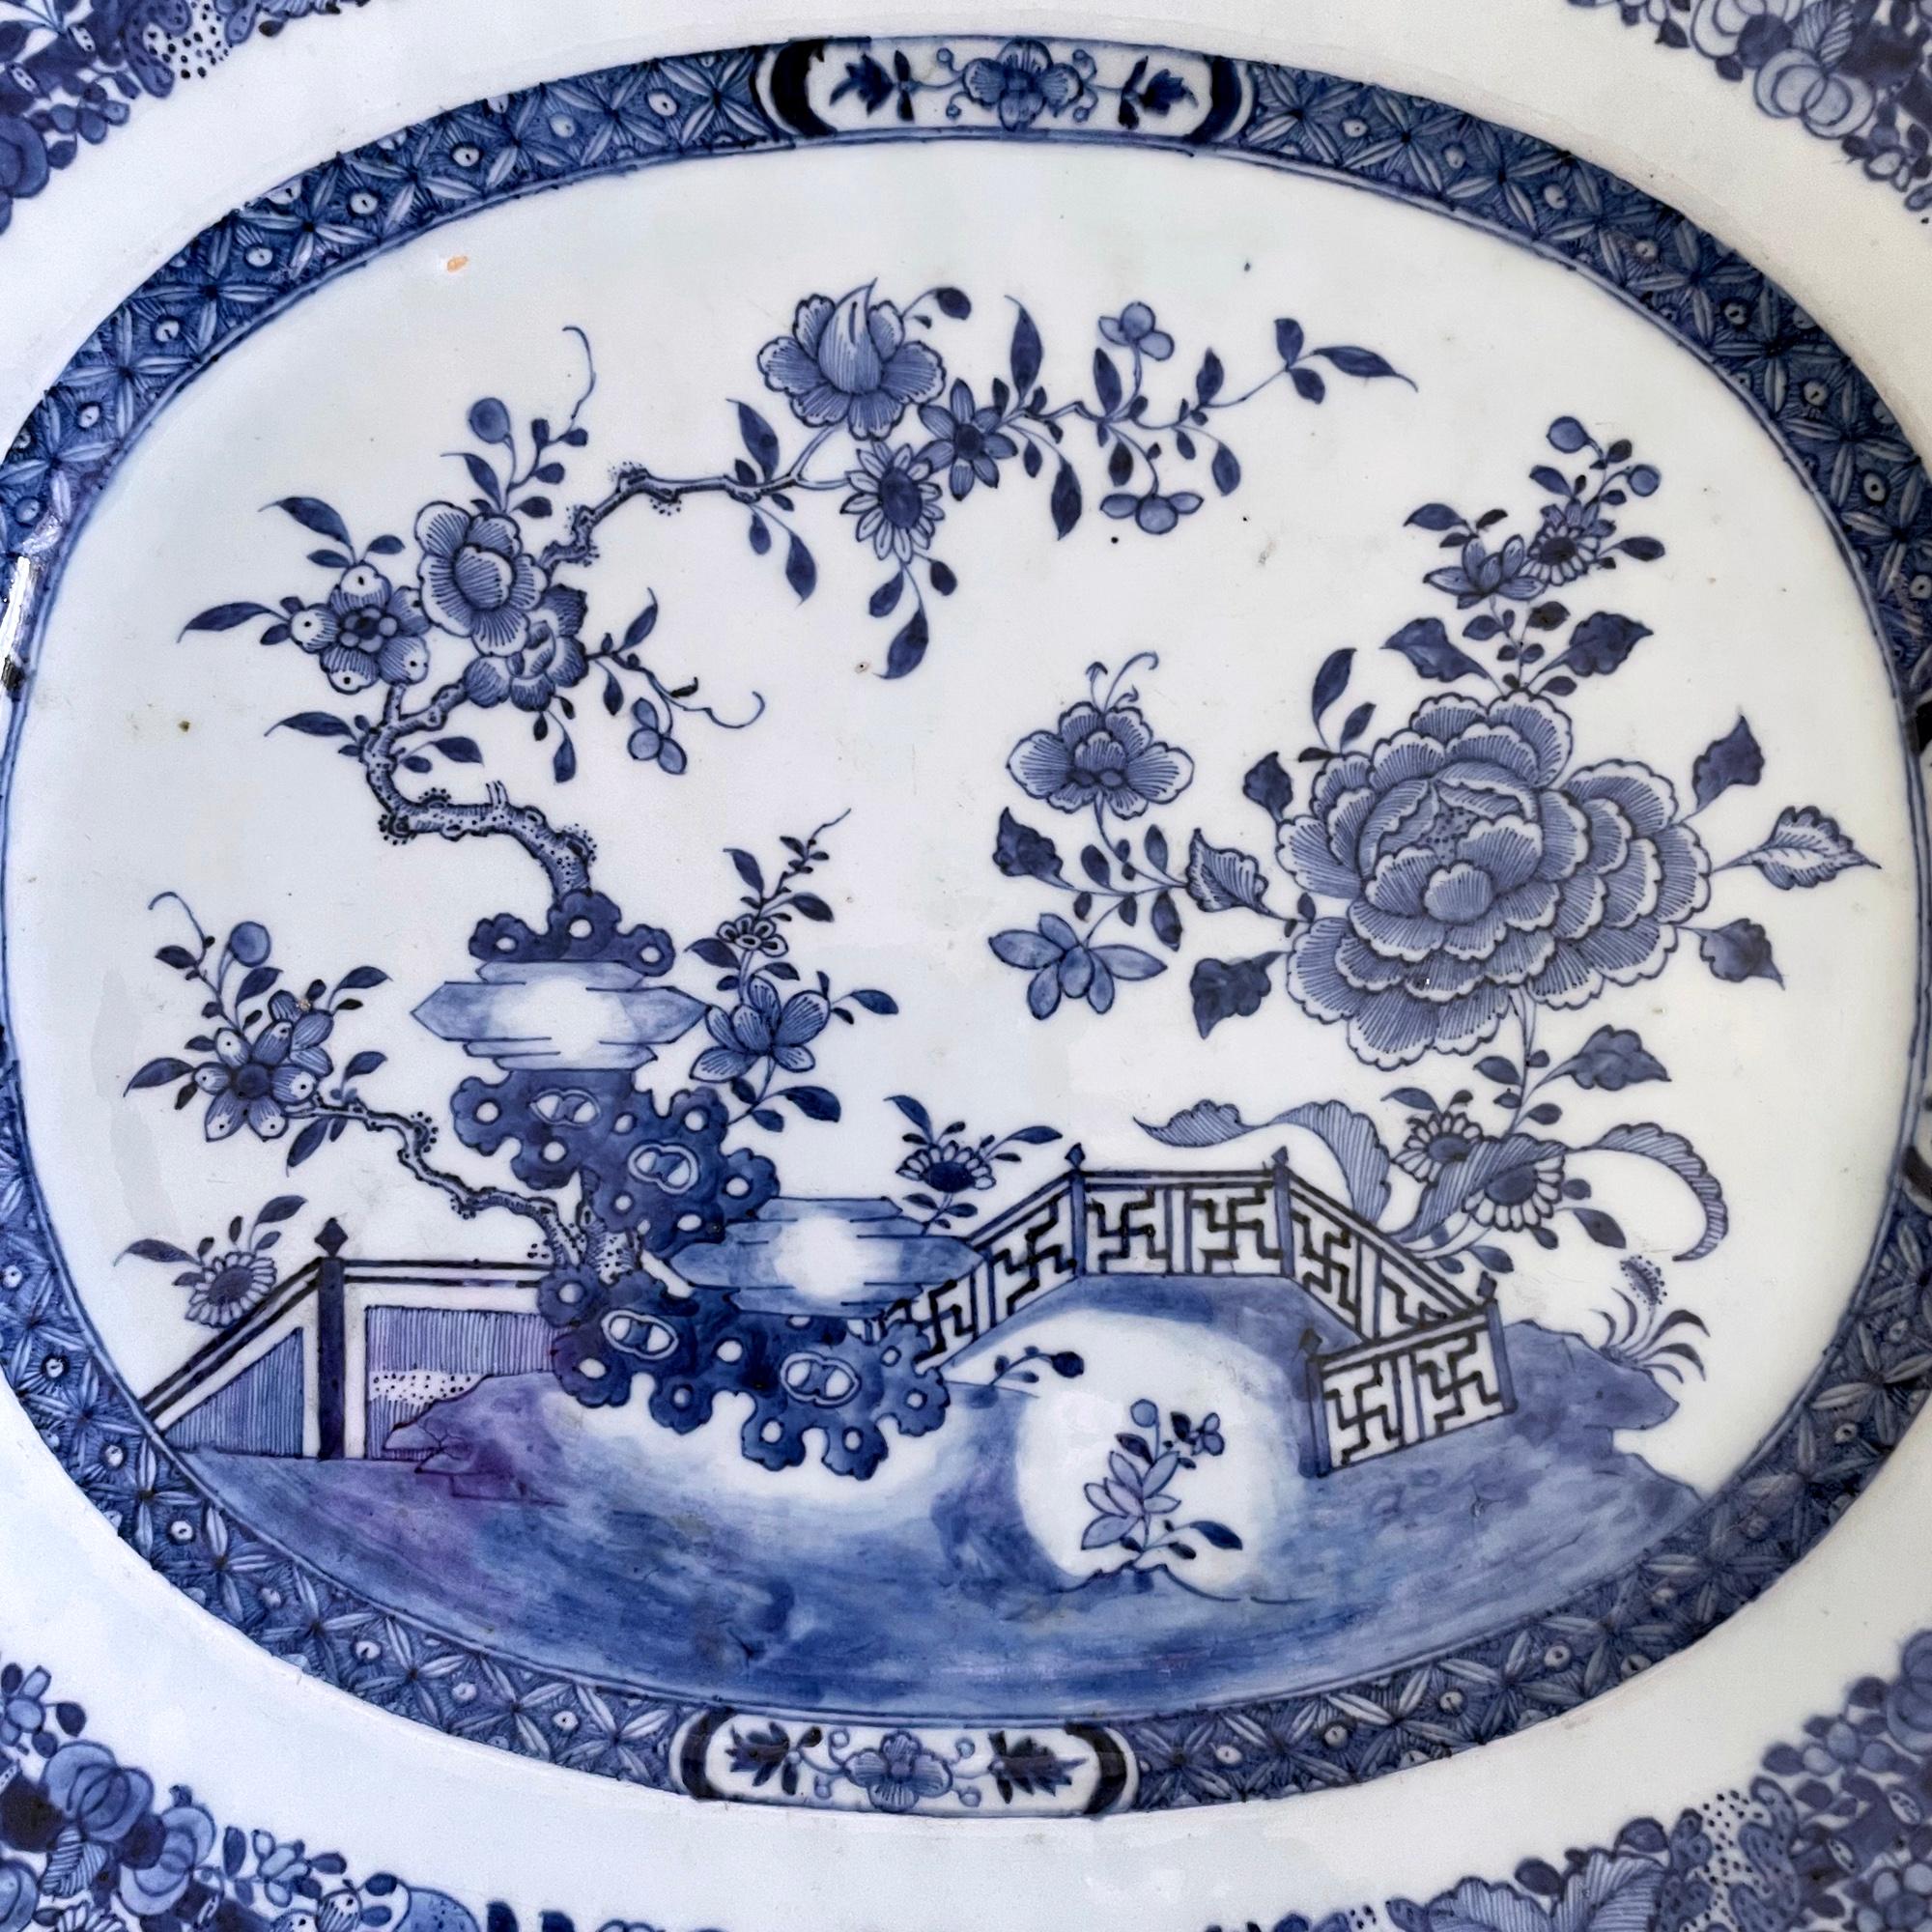 Chinese Export Porcelain blue & white massive dish,
Circa 1770 

The massive underglaze blue and white Chinese Export dish is painted with a garden scene with flowering plants growing in the ground and on rockwork. The scene is centered with a